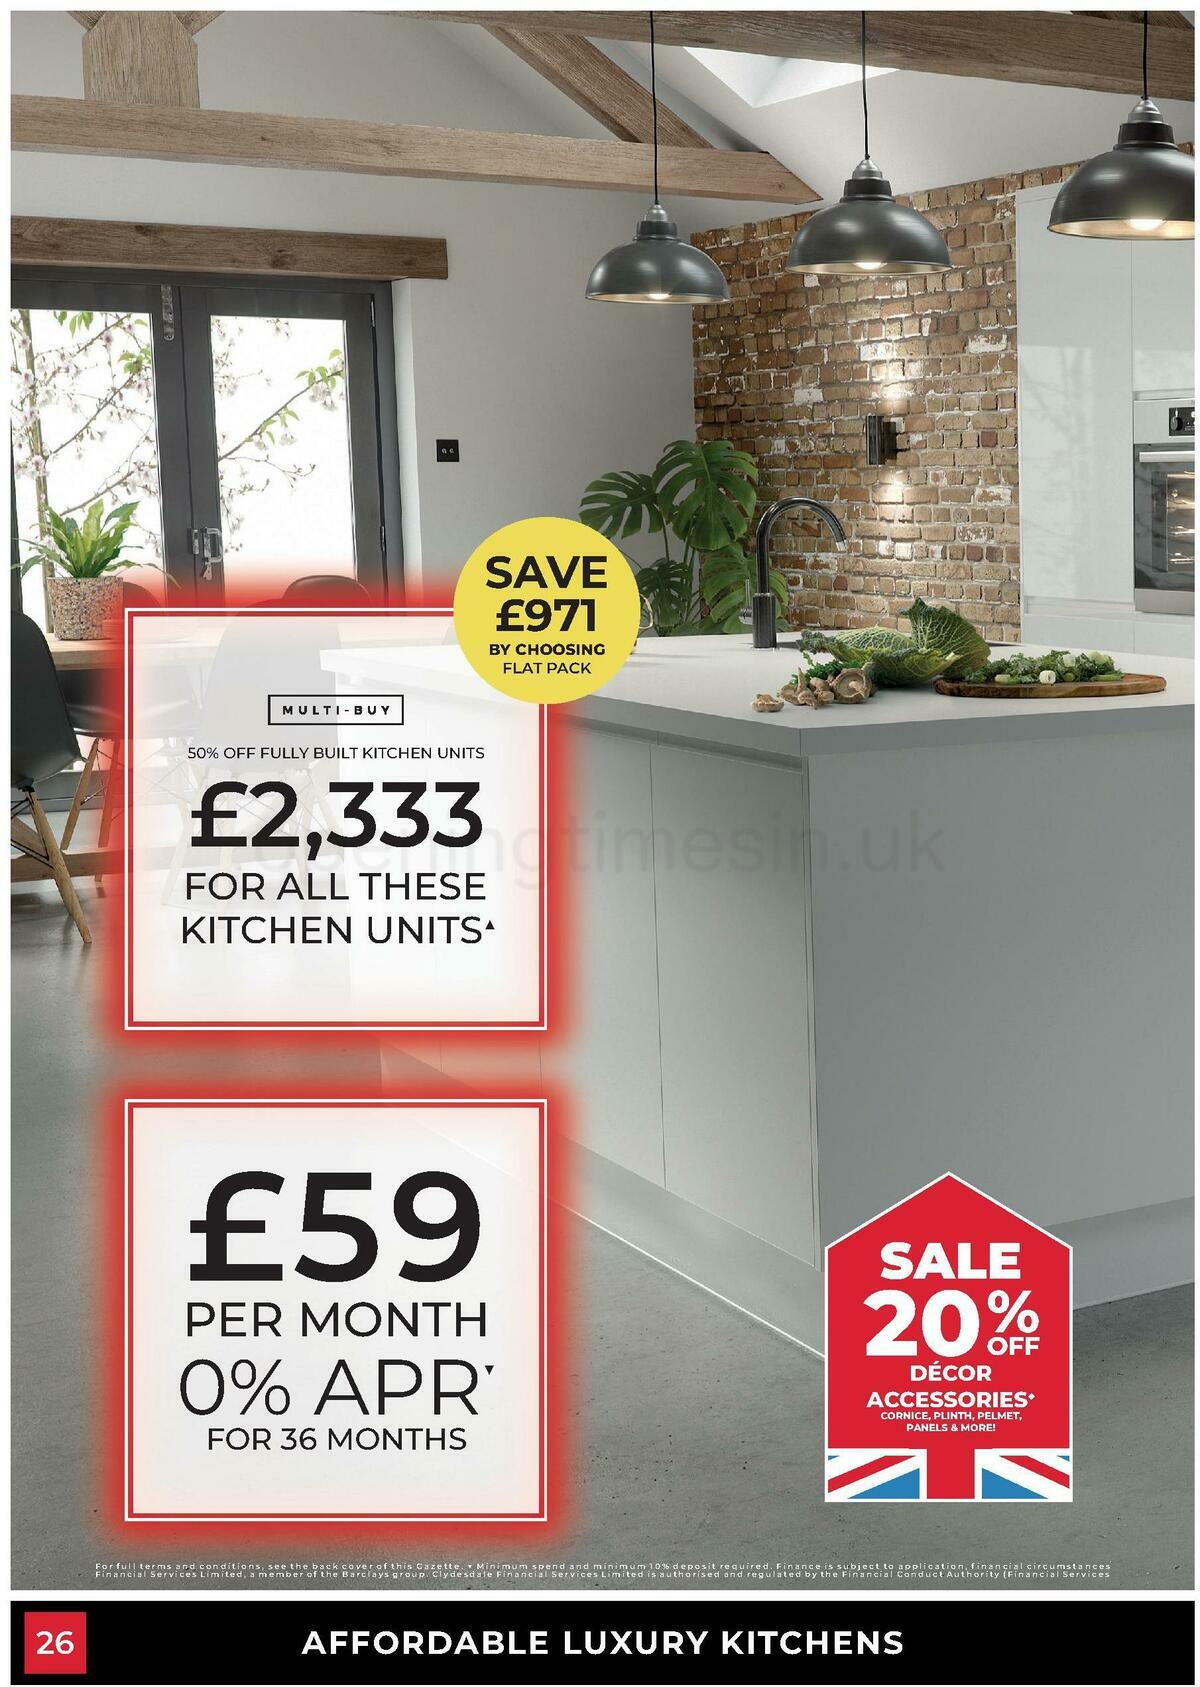 Wren Kitchens Offers from 3 February